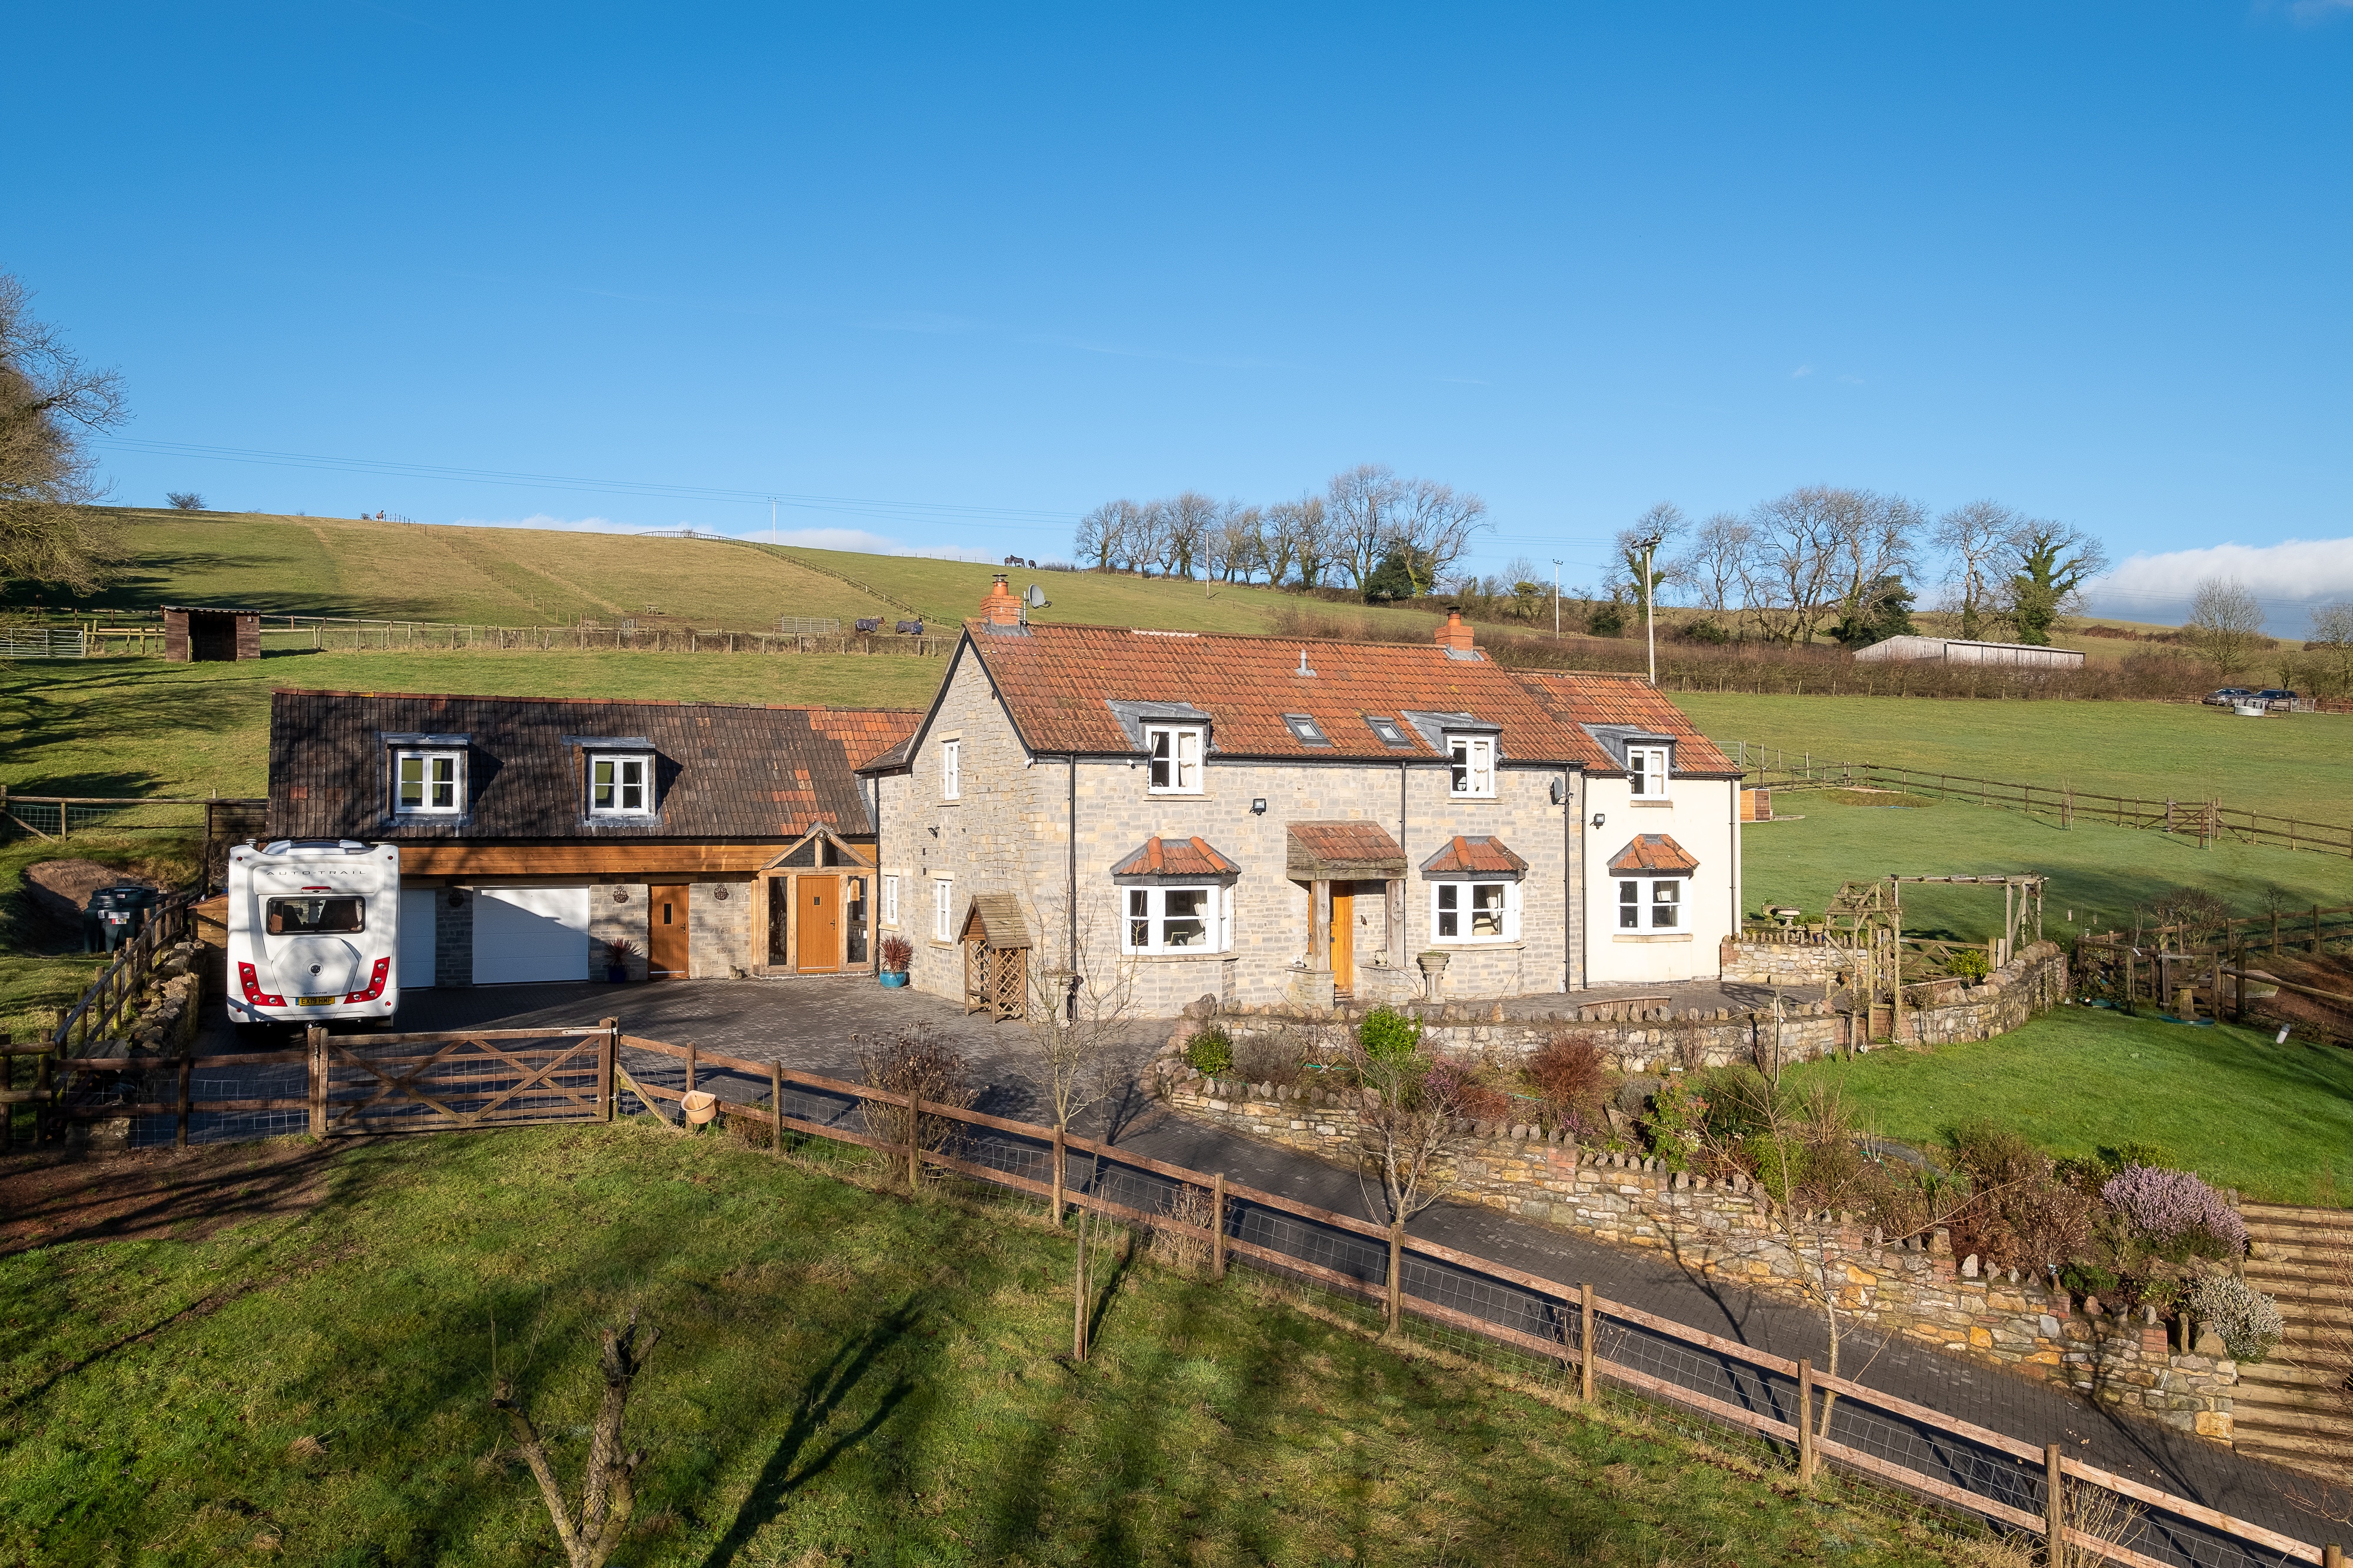 5 bedroom detached property in 12 acres with extensive equestrian facilities